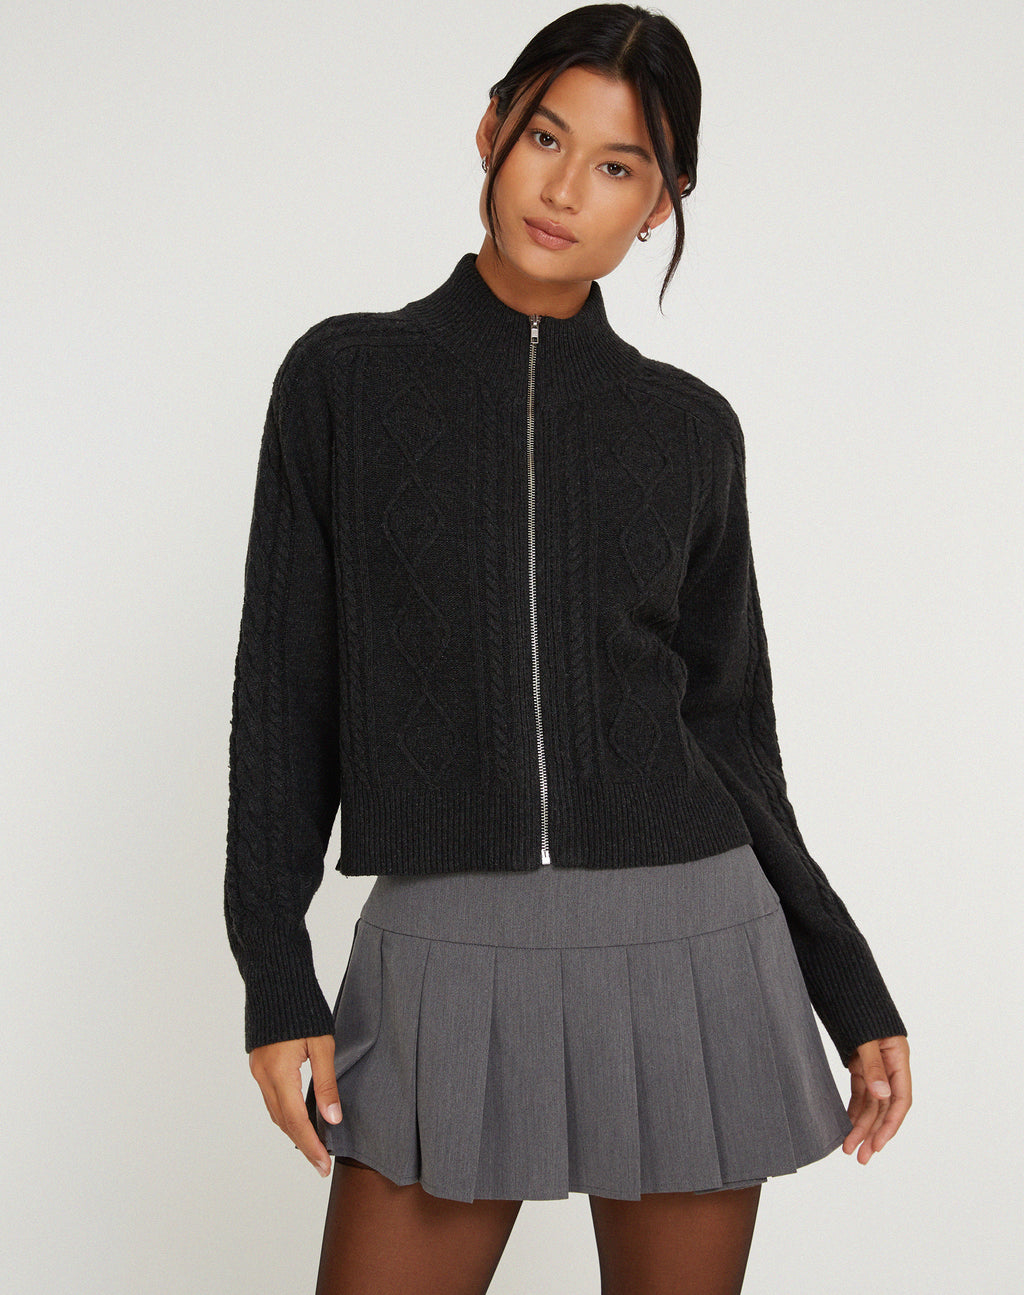 Lemila Cable Knit Jacket in Dark Shadow